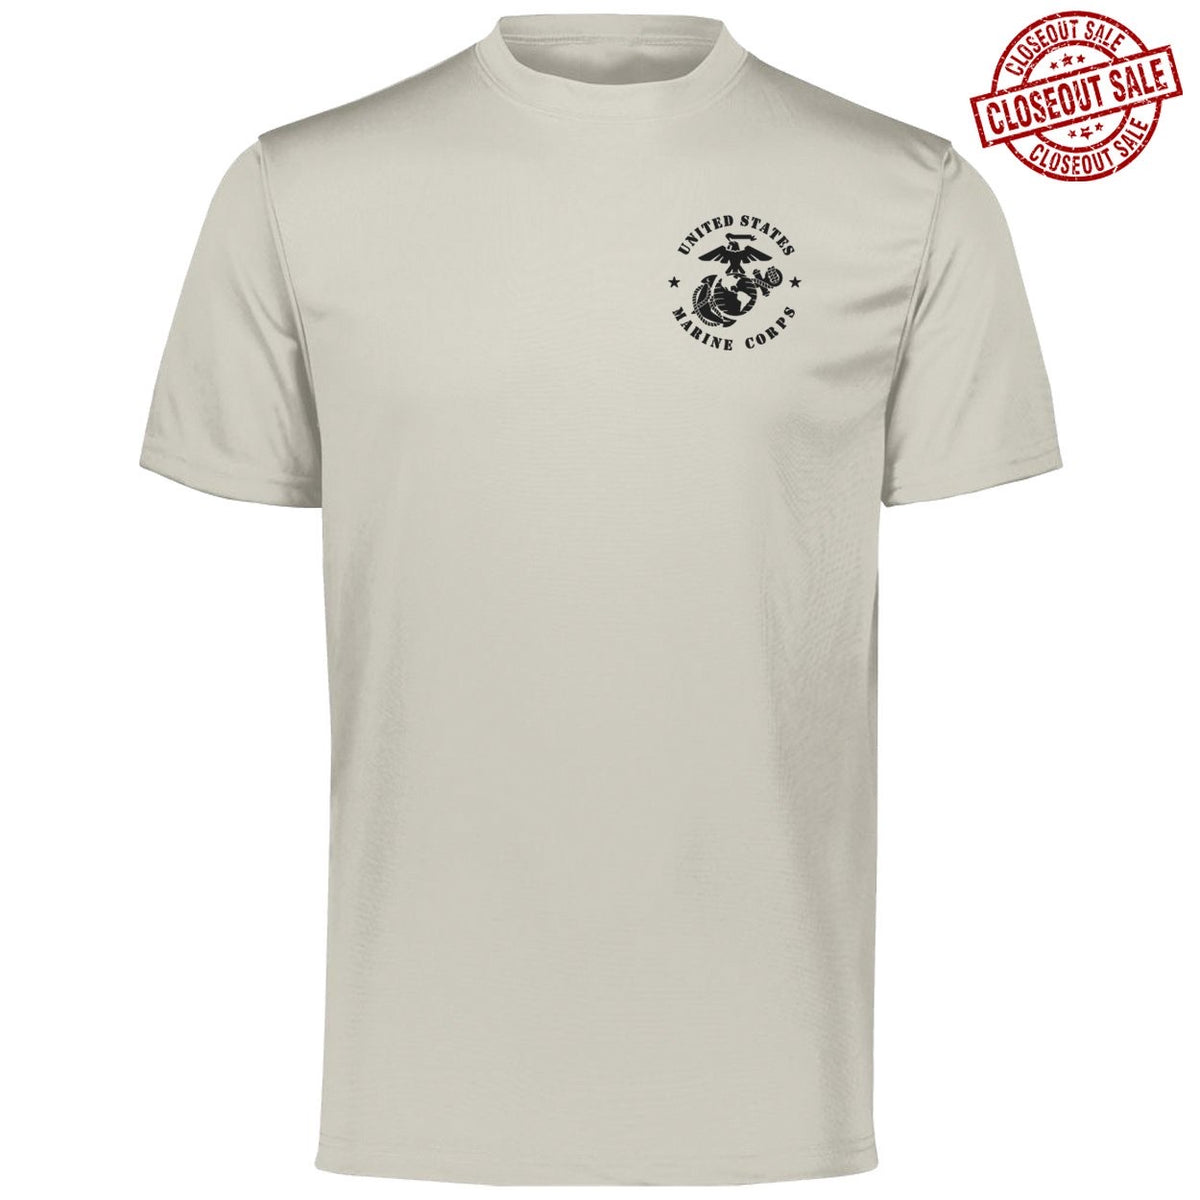 CLOSEOUT Full Circle USMC Chest Seal Dri-Fit Performance Silver Grey T-Shirt - Marine Corps Direct